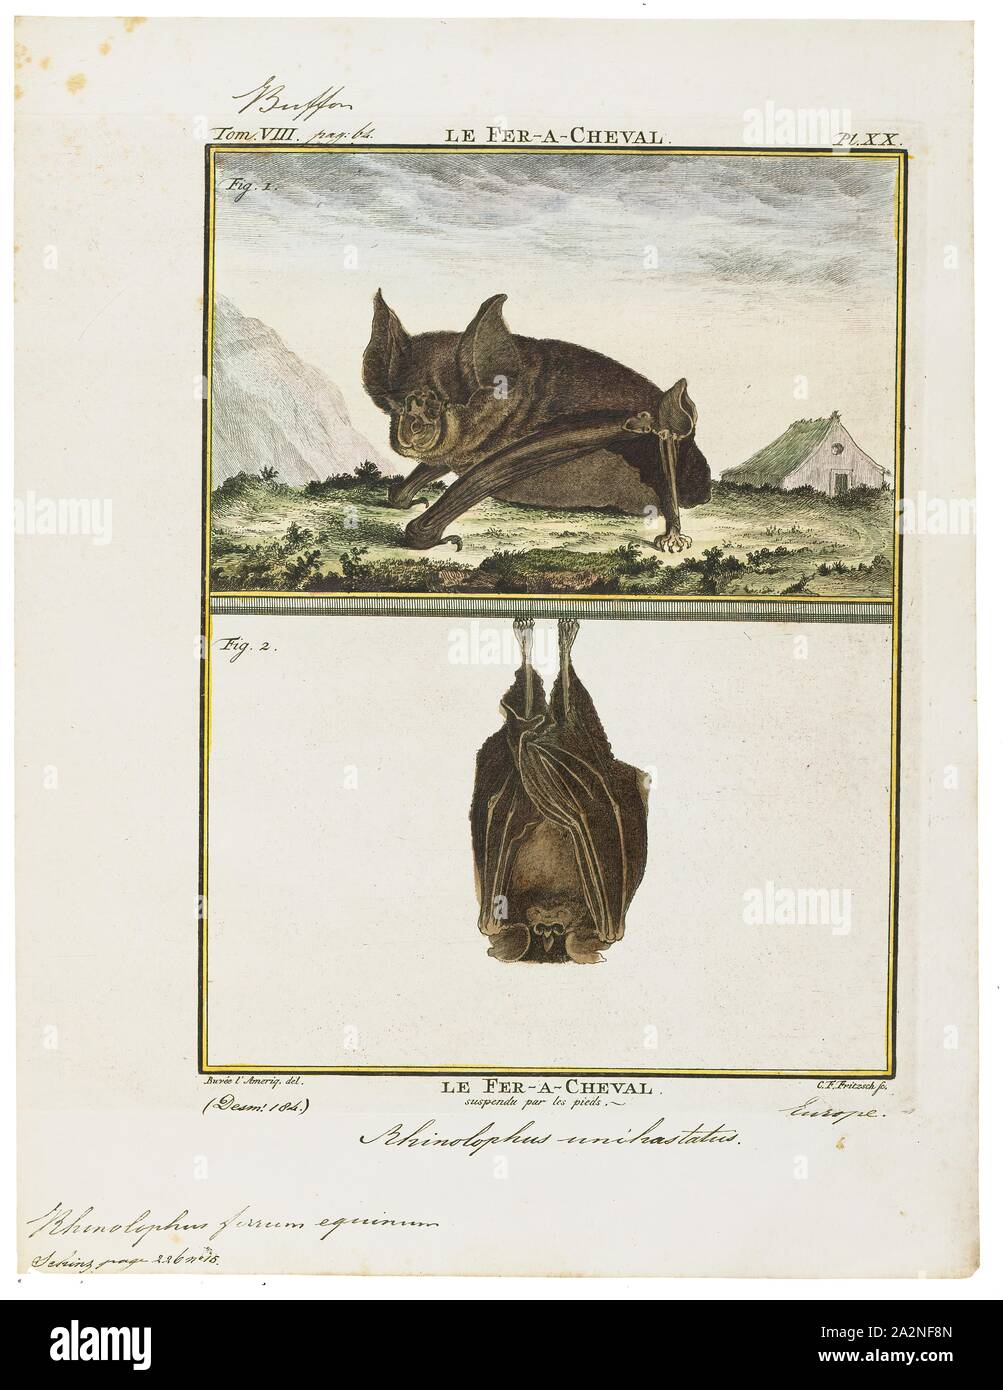 Rhinolophus ferrum equinum, Print, Horseshoe bat, Horseshoe bats make up the bat family Rhinolophidae. In addition to the single living genus, Rhinolophus, one extinct genus, Palaeonycteris, has been recognized. The closely related Hipposideridae are sometimes included within the horseshoe bats as a subfamily, Hipposiderinae. Both families are classified in the suborder Yinpterochiroptera or Pteropodiformes and were previously included in Microchiroptera., 1700-1880 Stock Photo